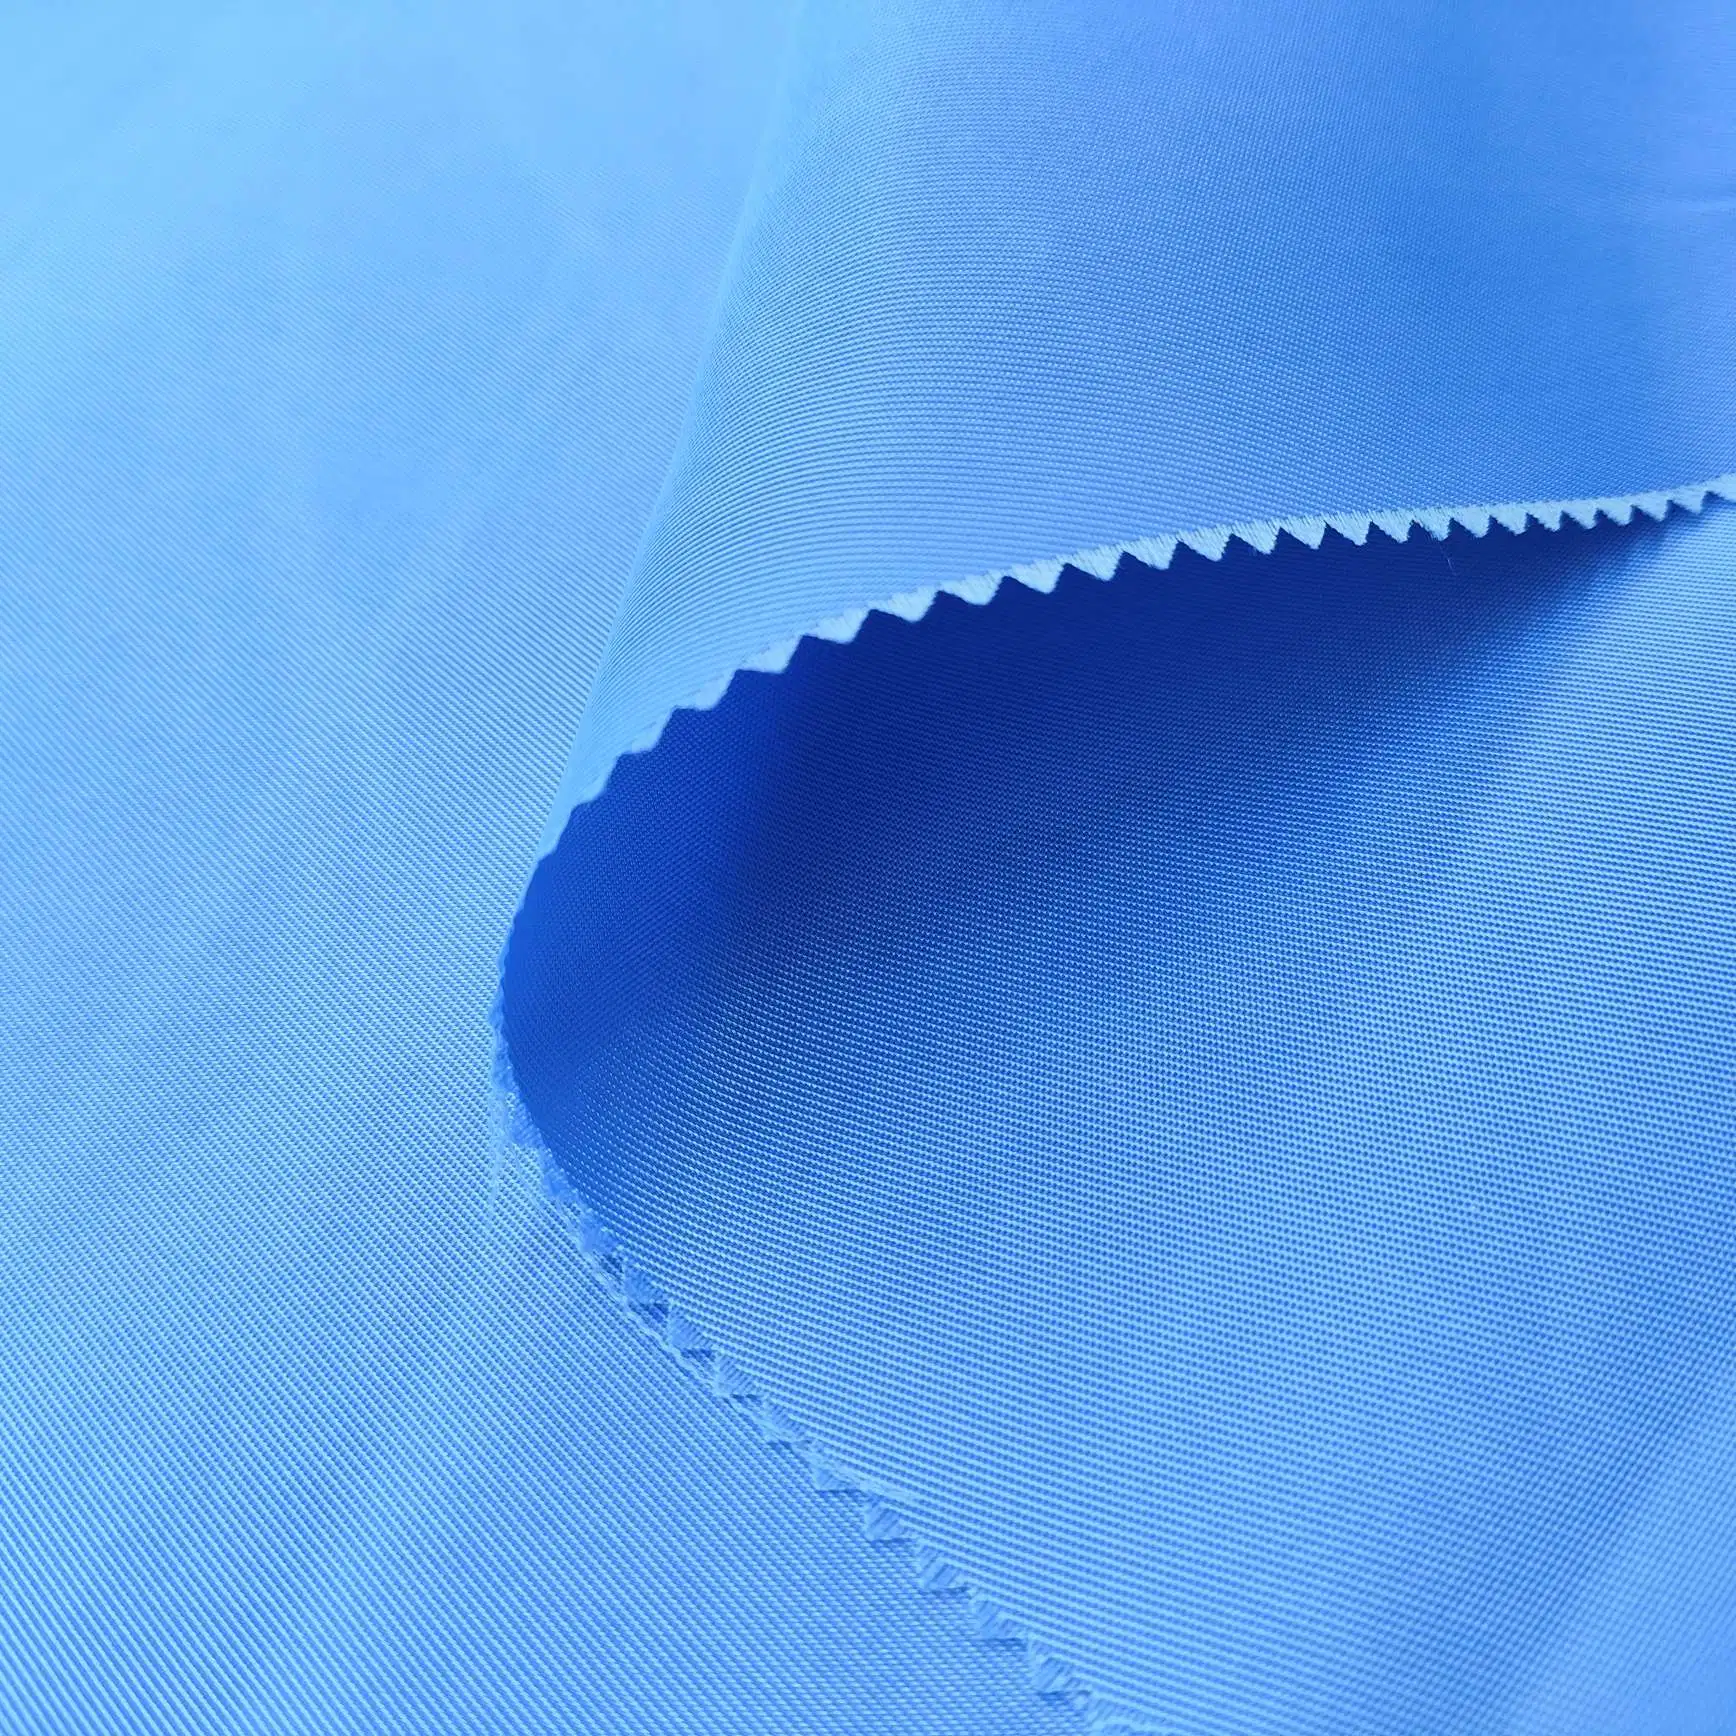 High Performance 100% Polyester 290d Twill Fabric for Uniform Luggage or Coat